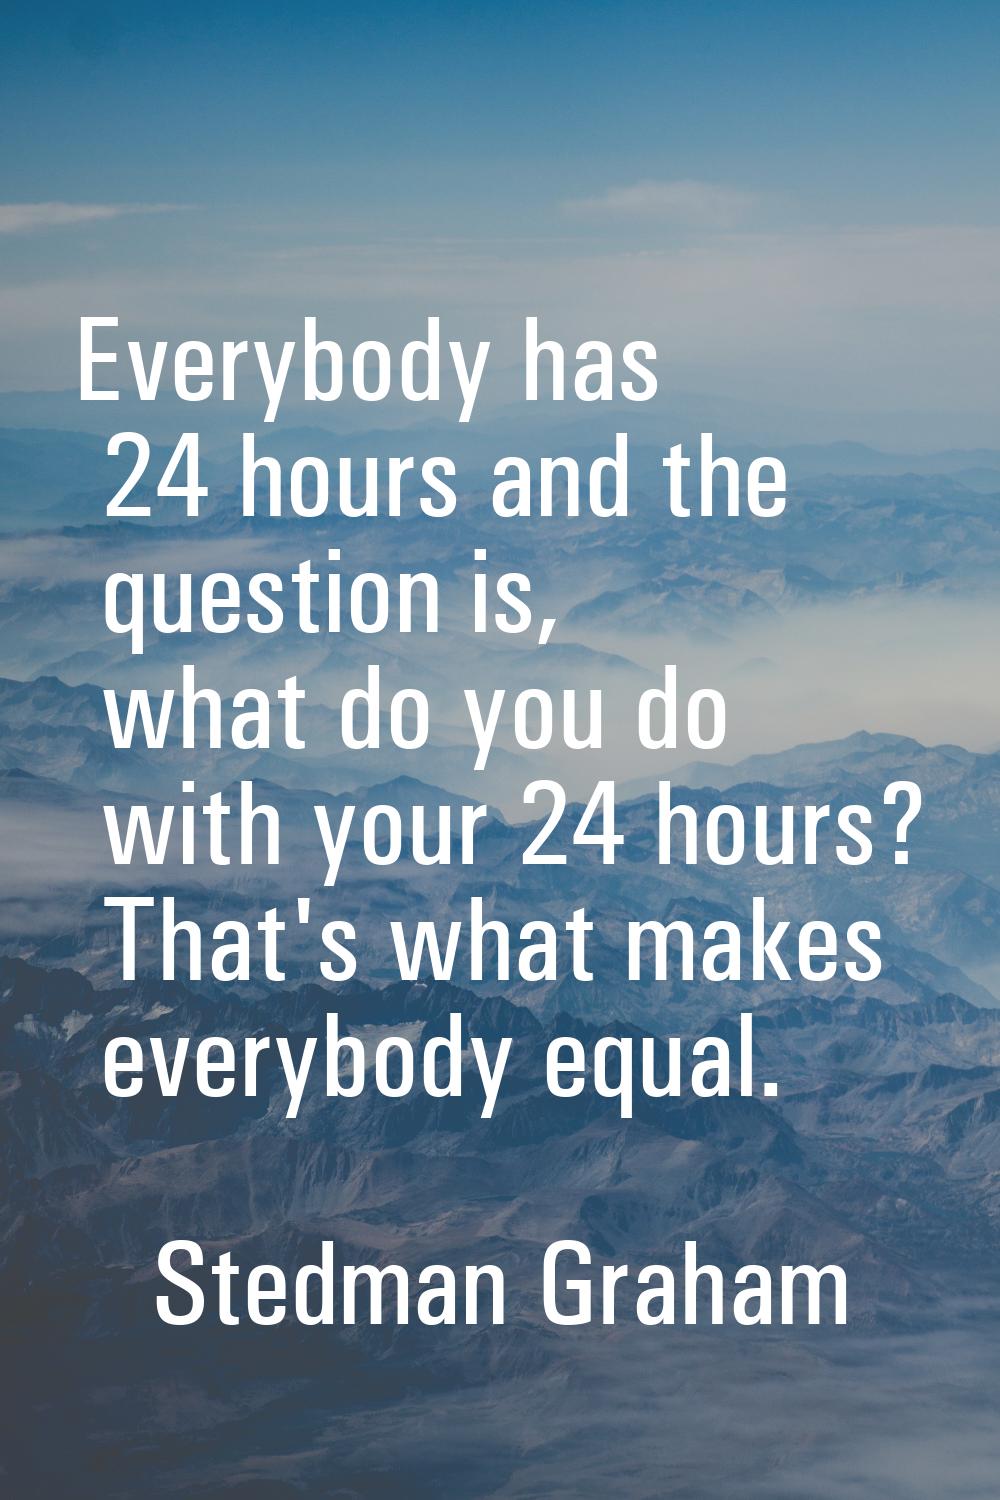 Everybody has 24 hours and the question is, what do you do with your 24 hours? That's what makes ev